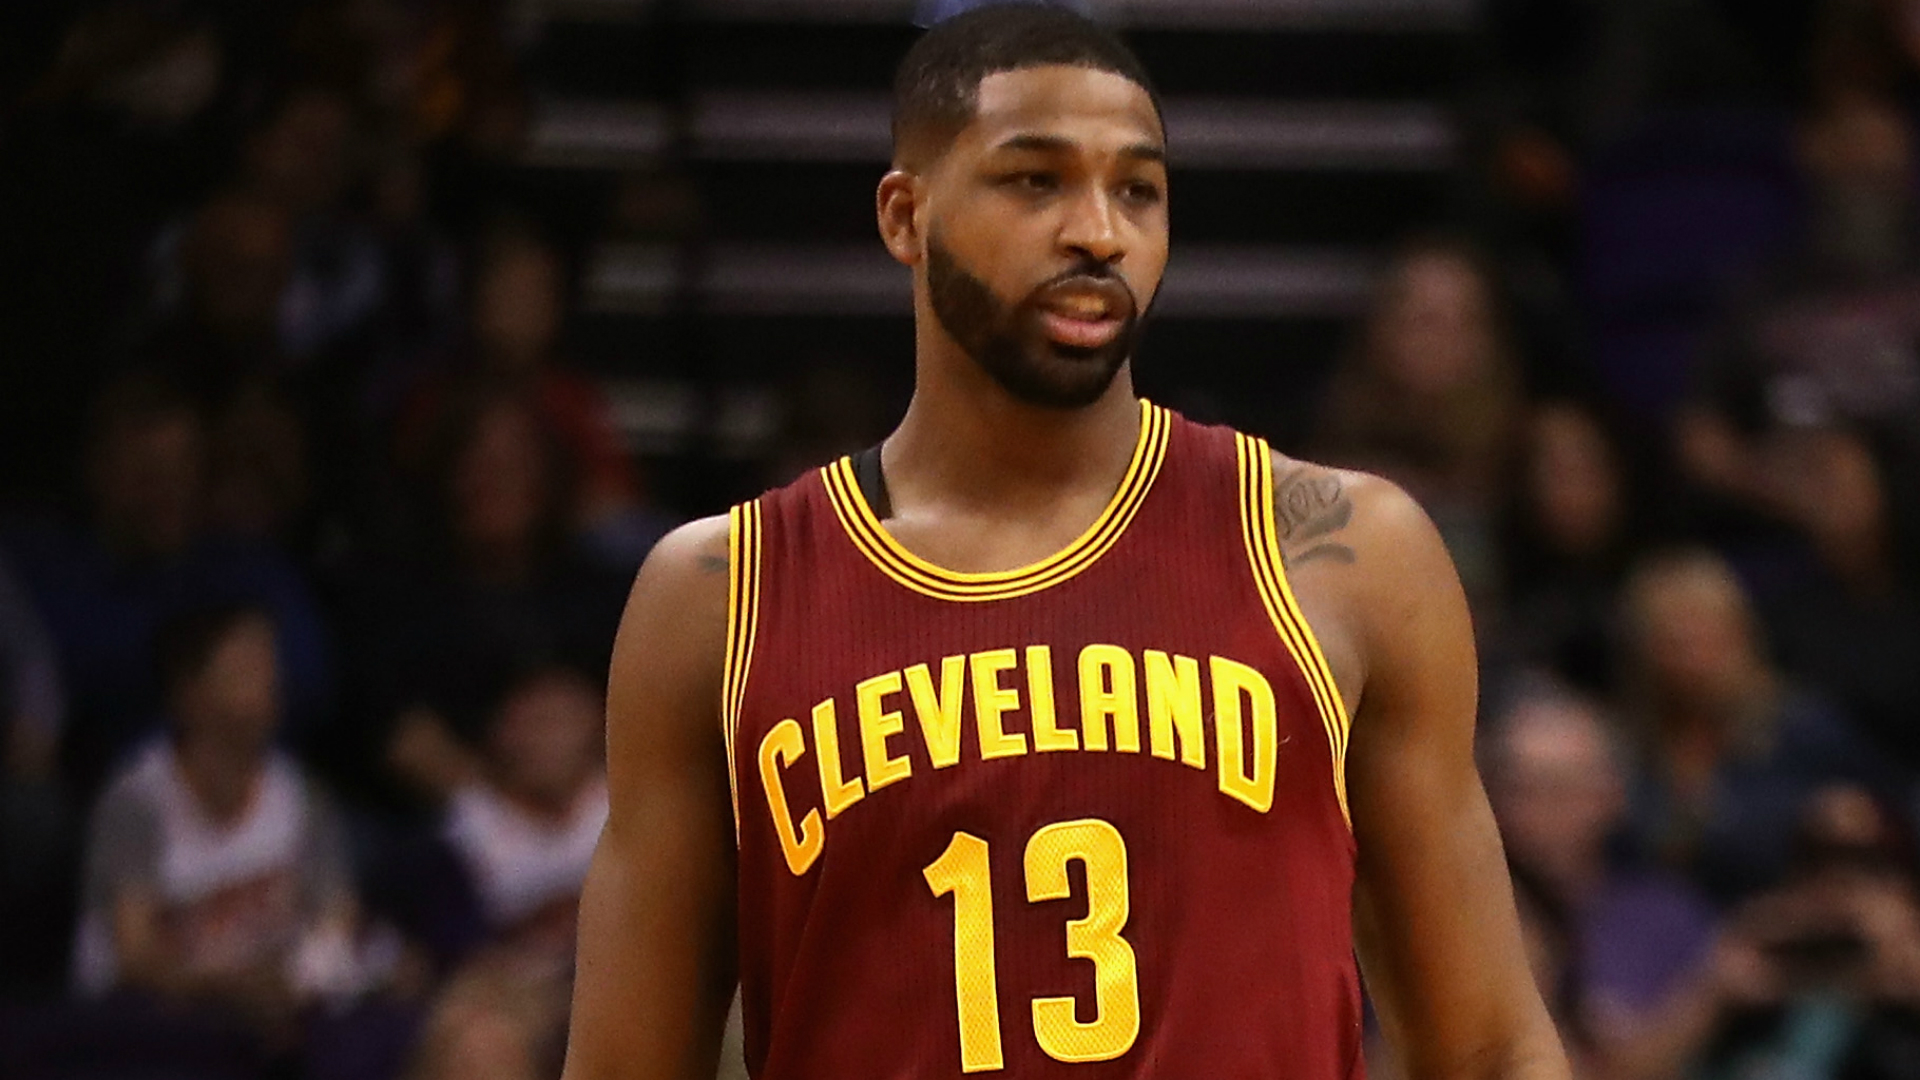 NBA trade rumors: Cavs could deal Tristan Thompson | Sporting News1920 x 1080